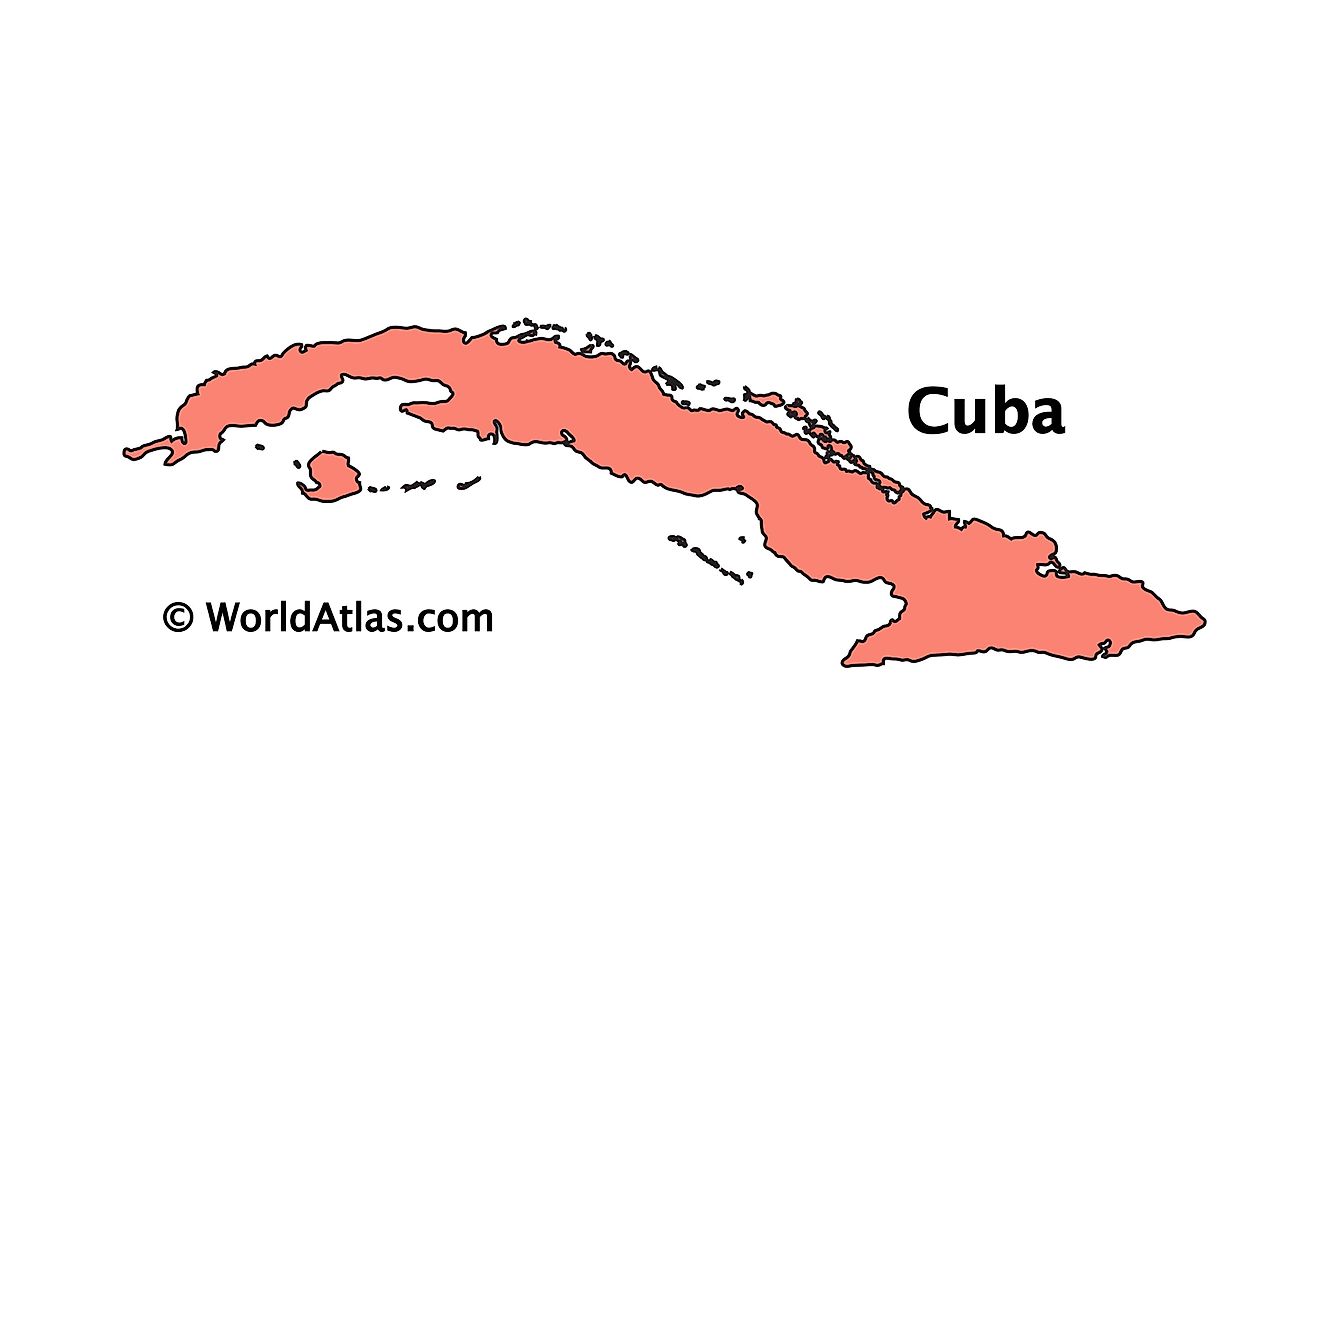 Cuba where is Information About